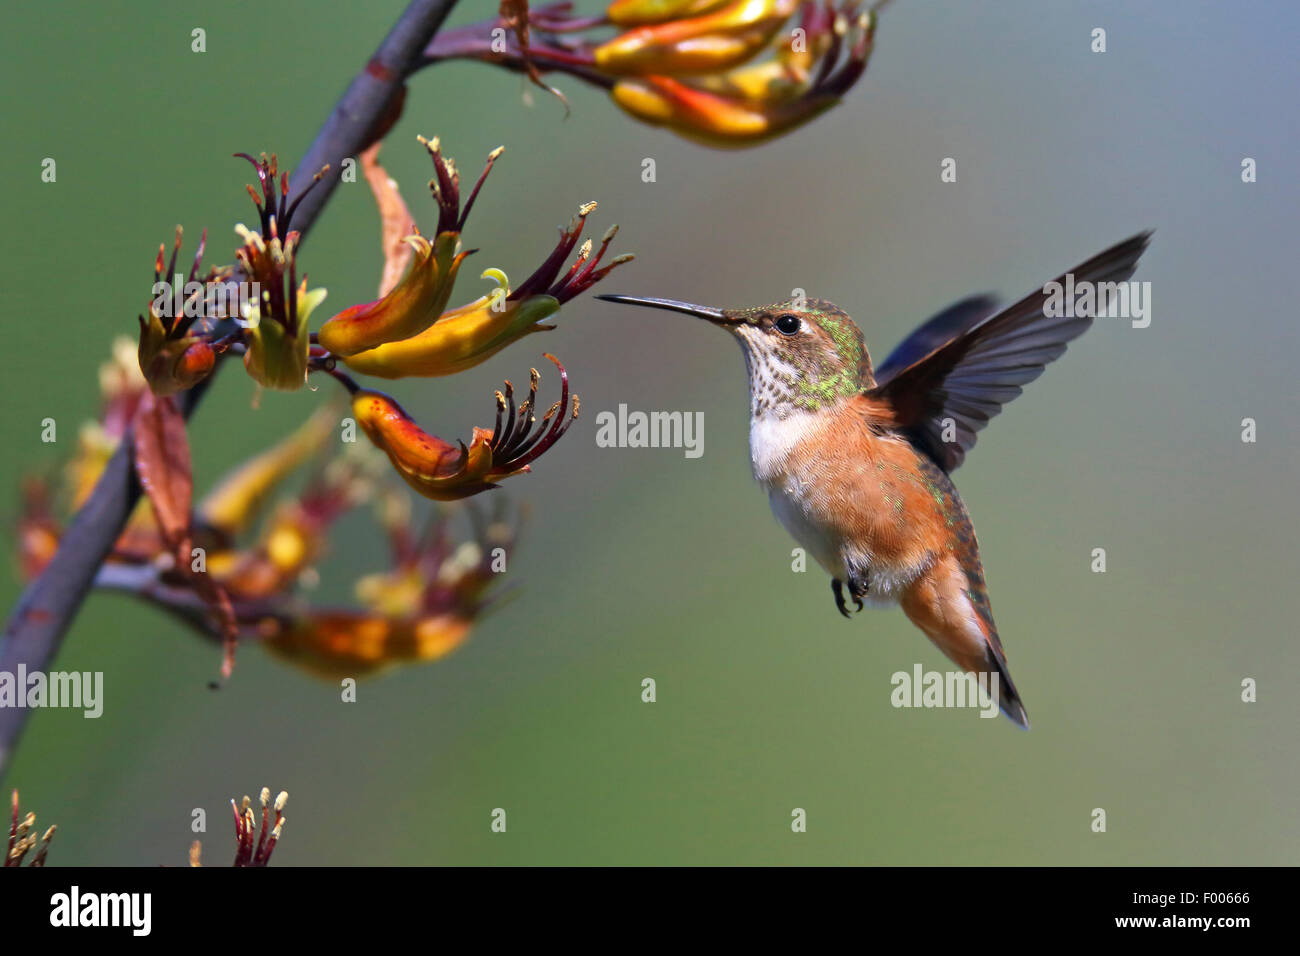 rufous hummingbird (Selasphorus rufus), female flying in front of a blossom, Canada, Vancouver Island Stock Photo